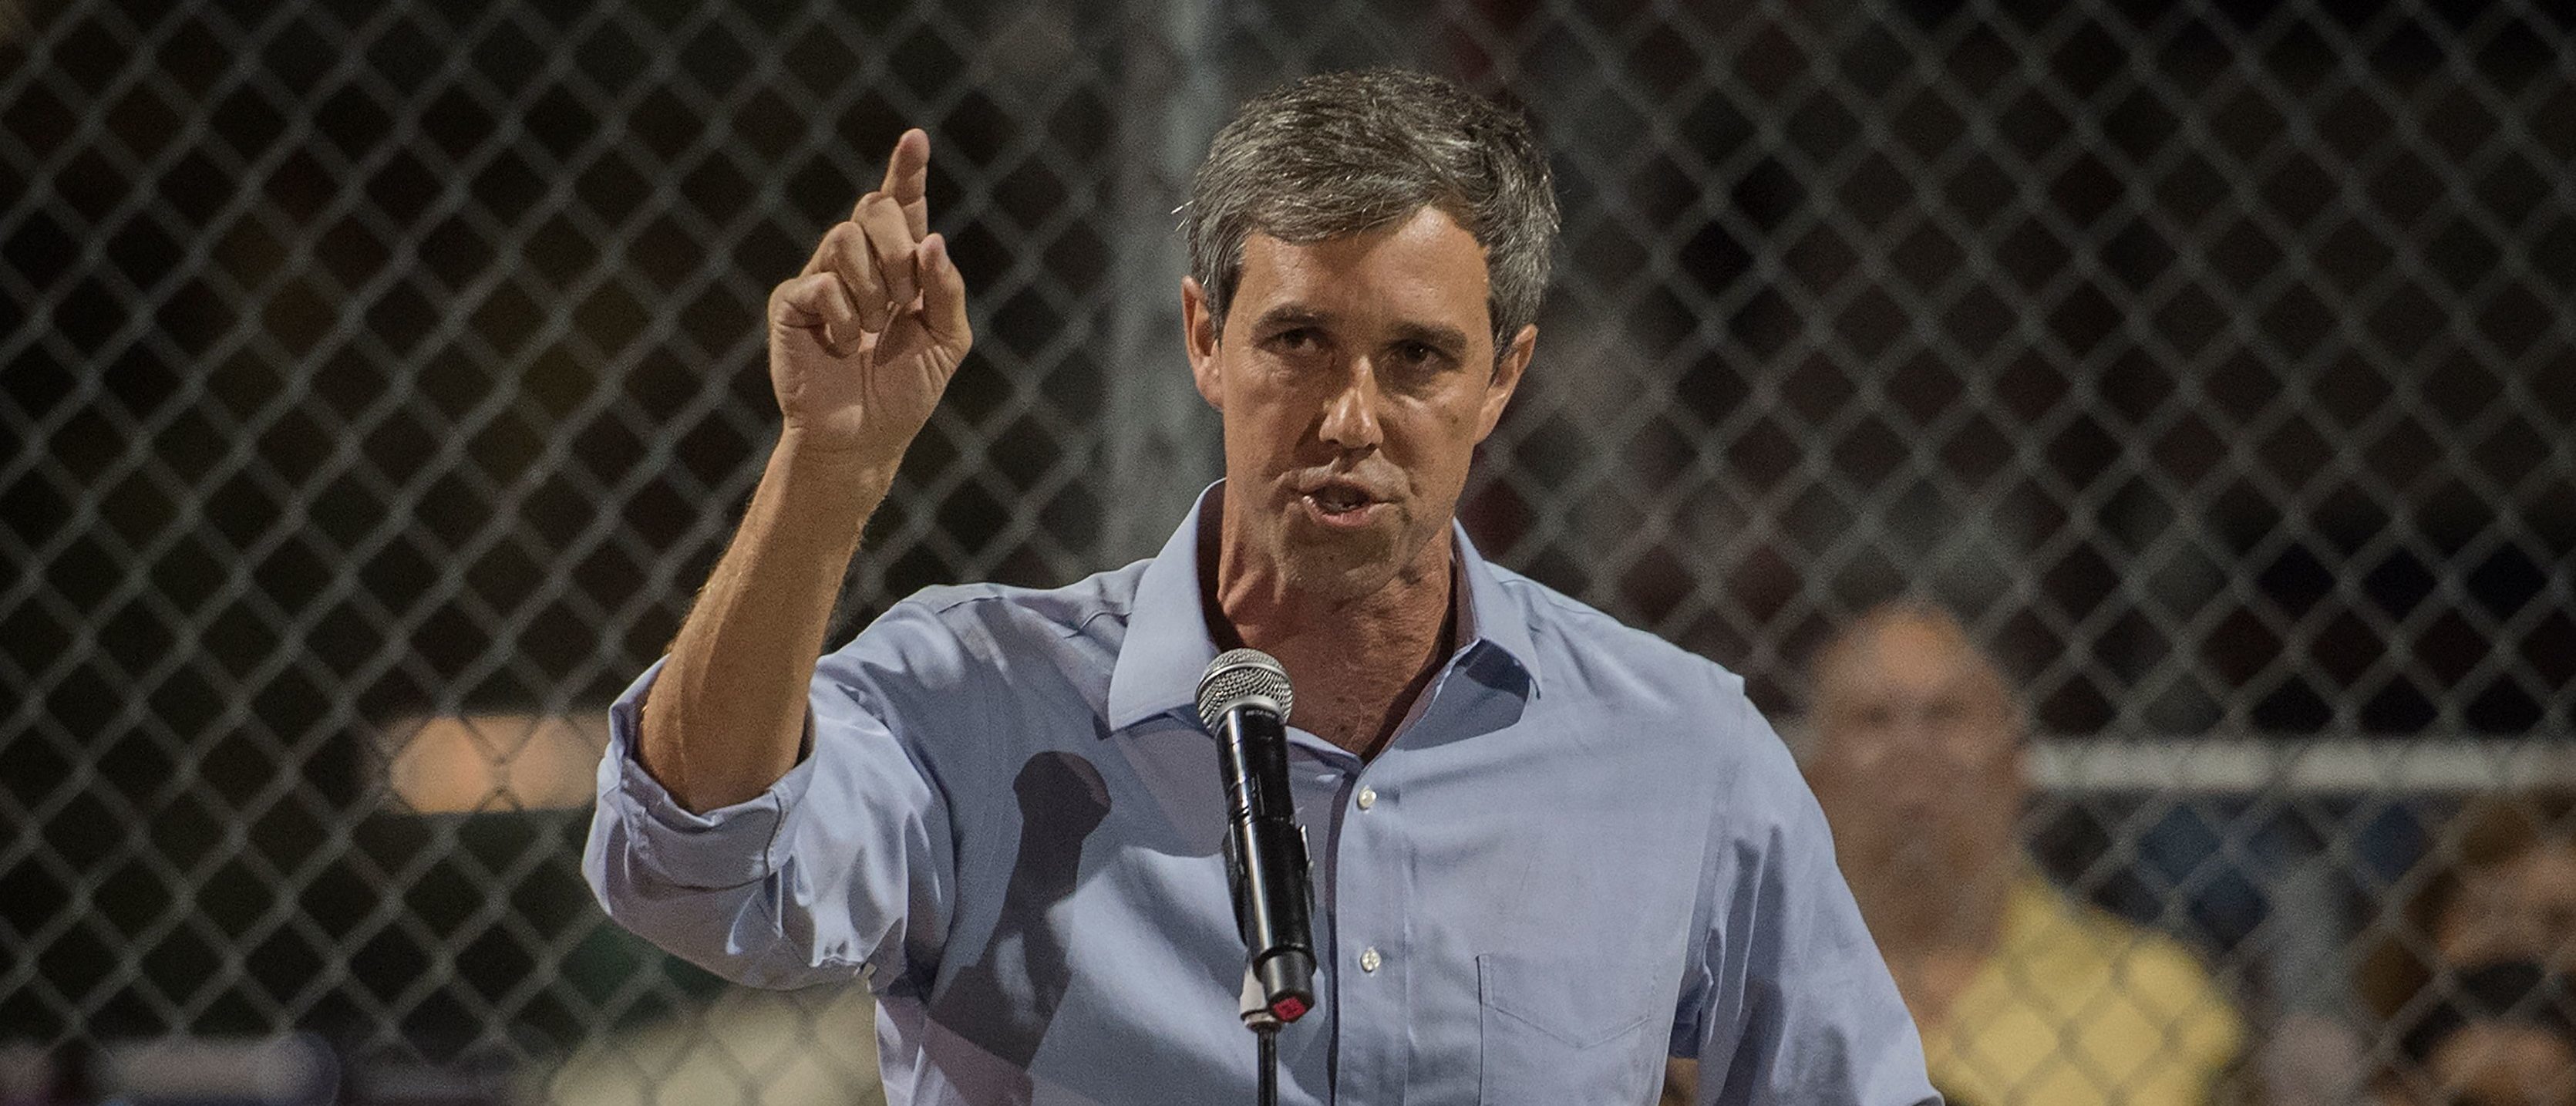 Democratic presidential hopeful and former U.S. Rep. for Texas' 16th congressional district Beto O'Rourke speaks to the crowd during a prayer and candle vigil organized by the city, after a shooting left 22 people dead at the Cielo Vista Mall WalMart in El Paso, Texas, on Aug. 4, 2019. (MARK RALSTON/AFP/Getty Images)